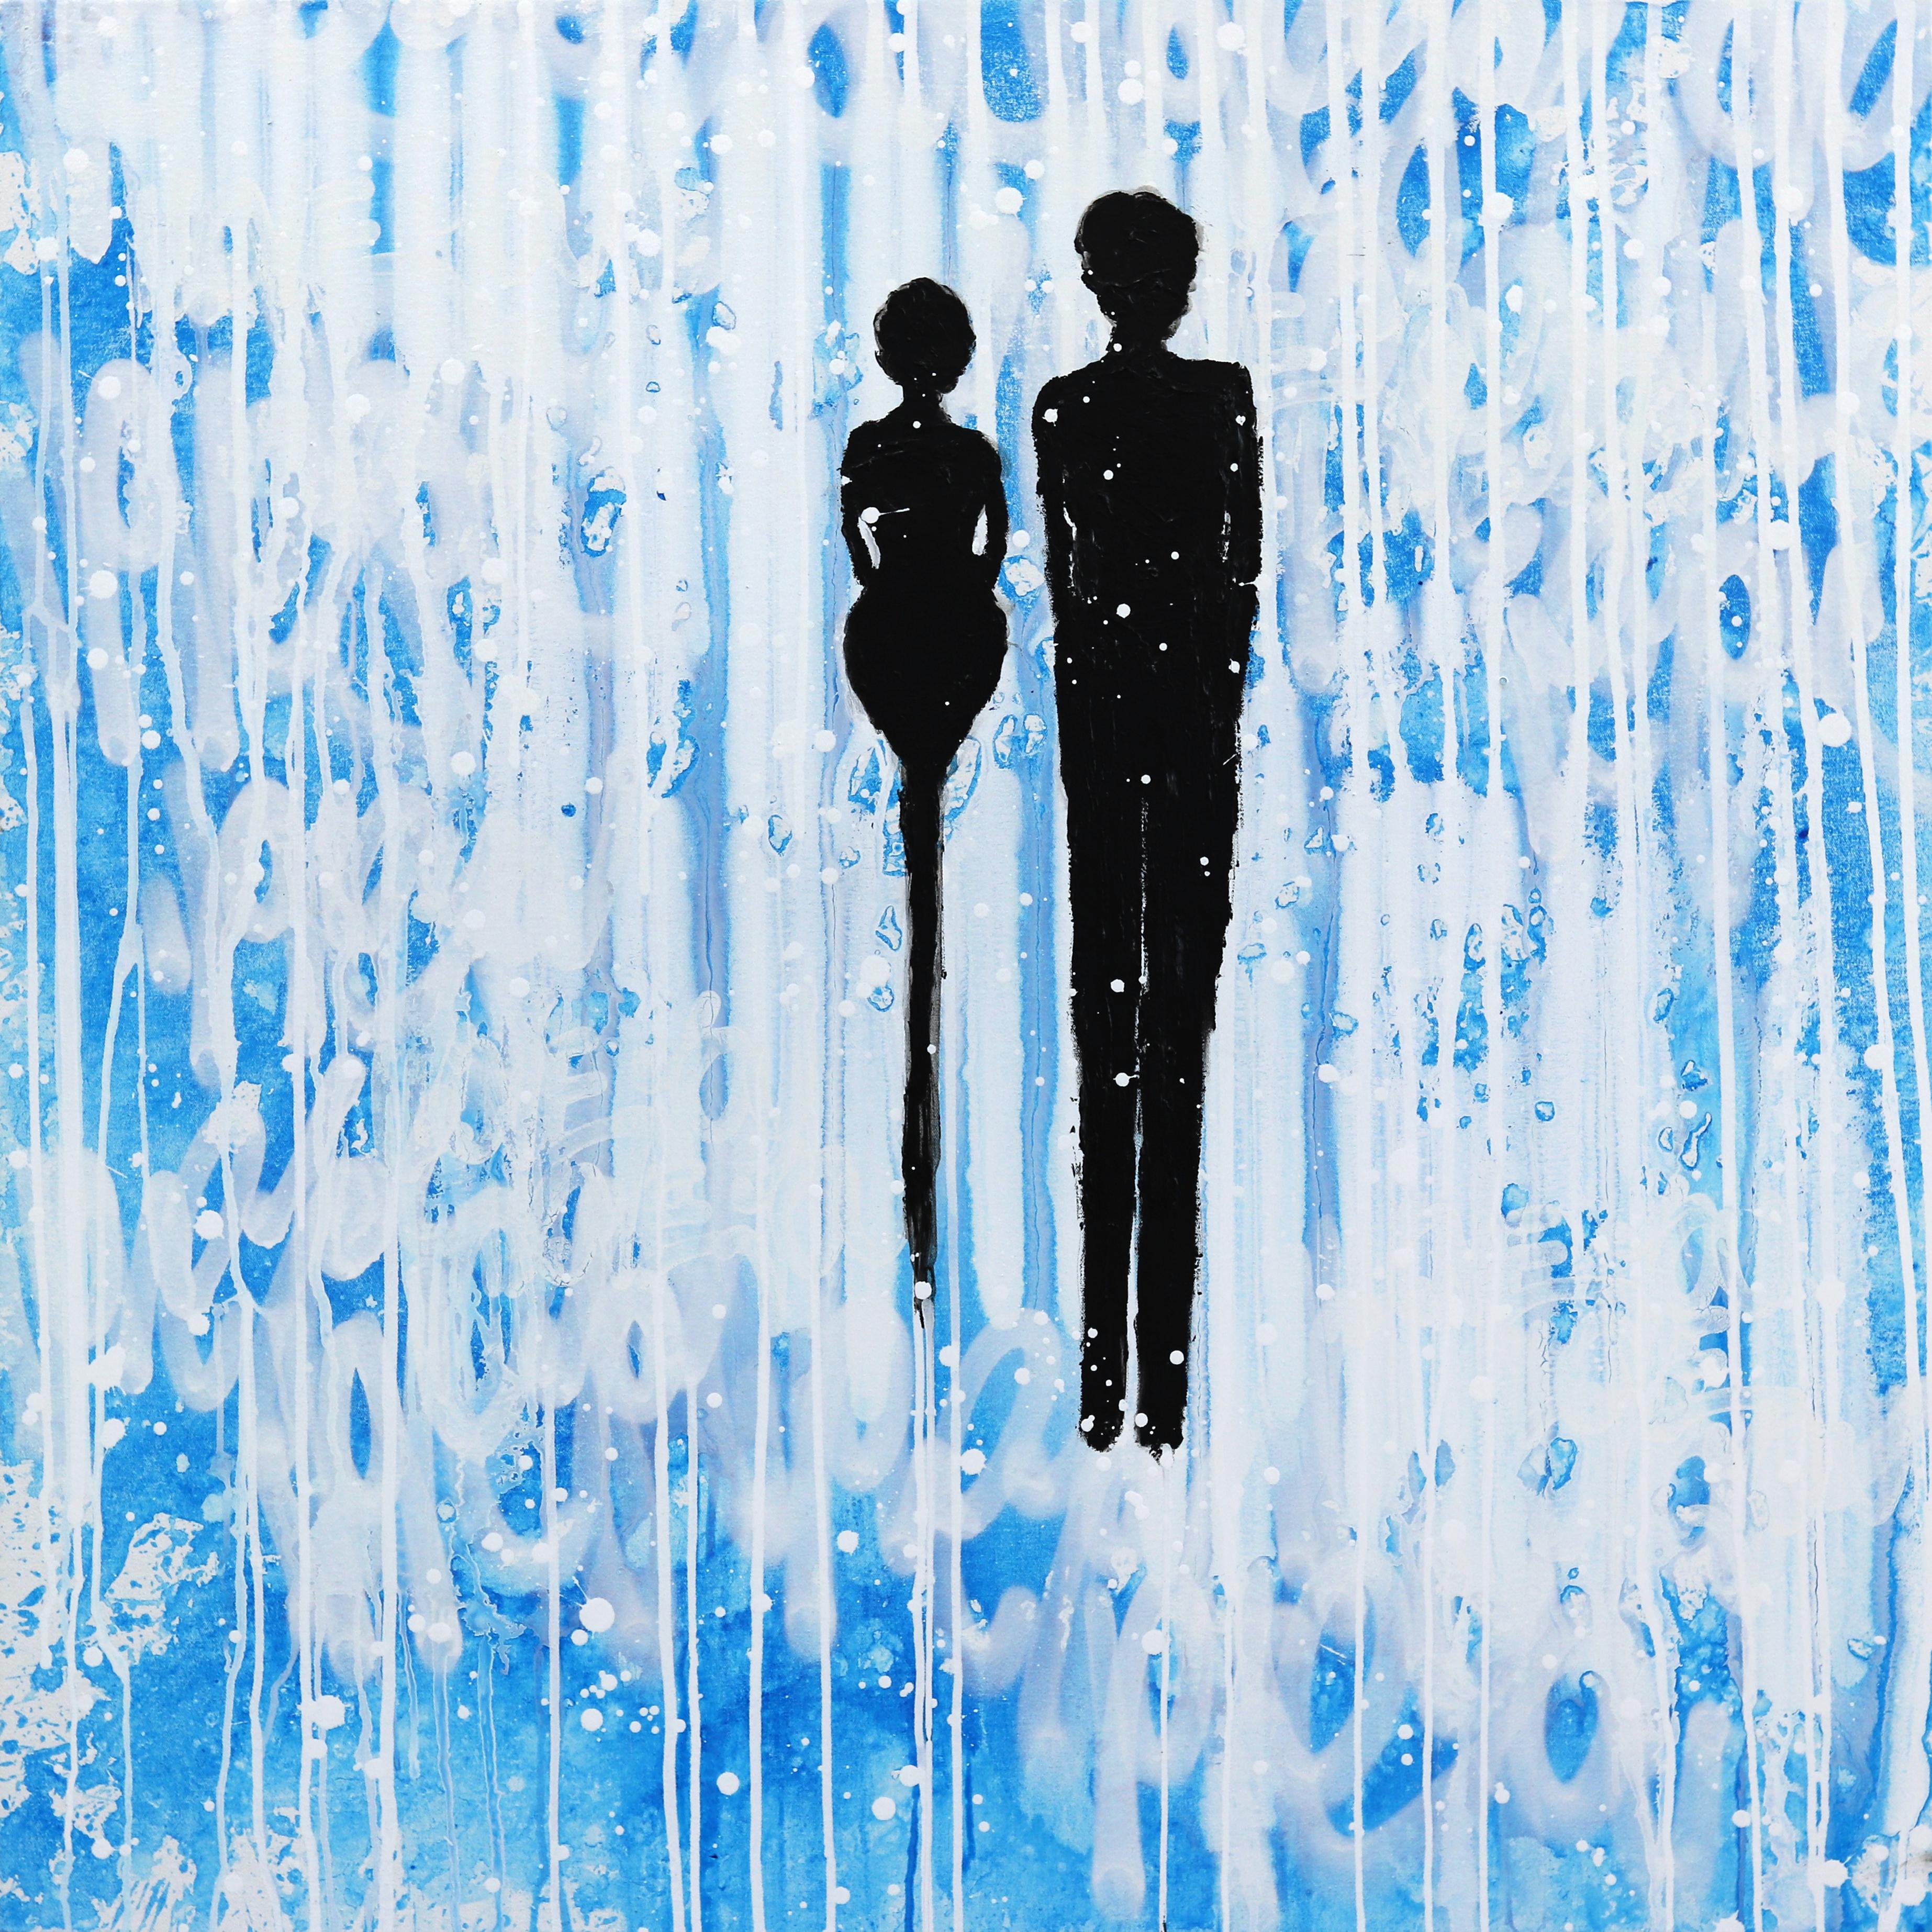 Me And My Sweetheart - Abstract Figurative Contemporary Painting